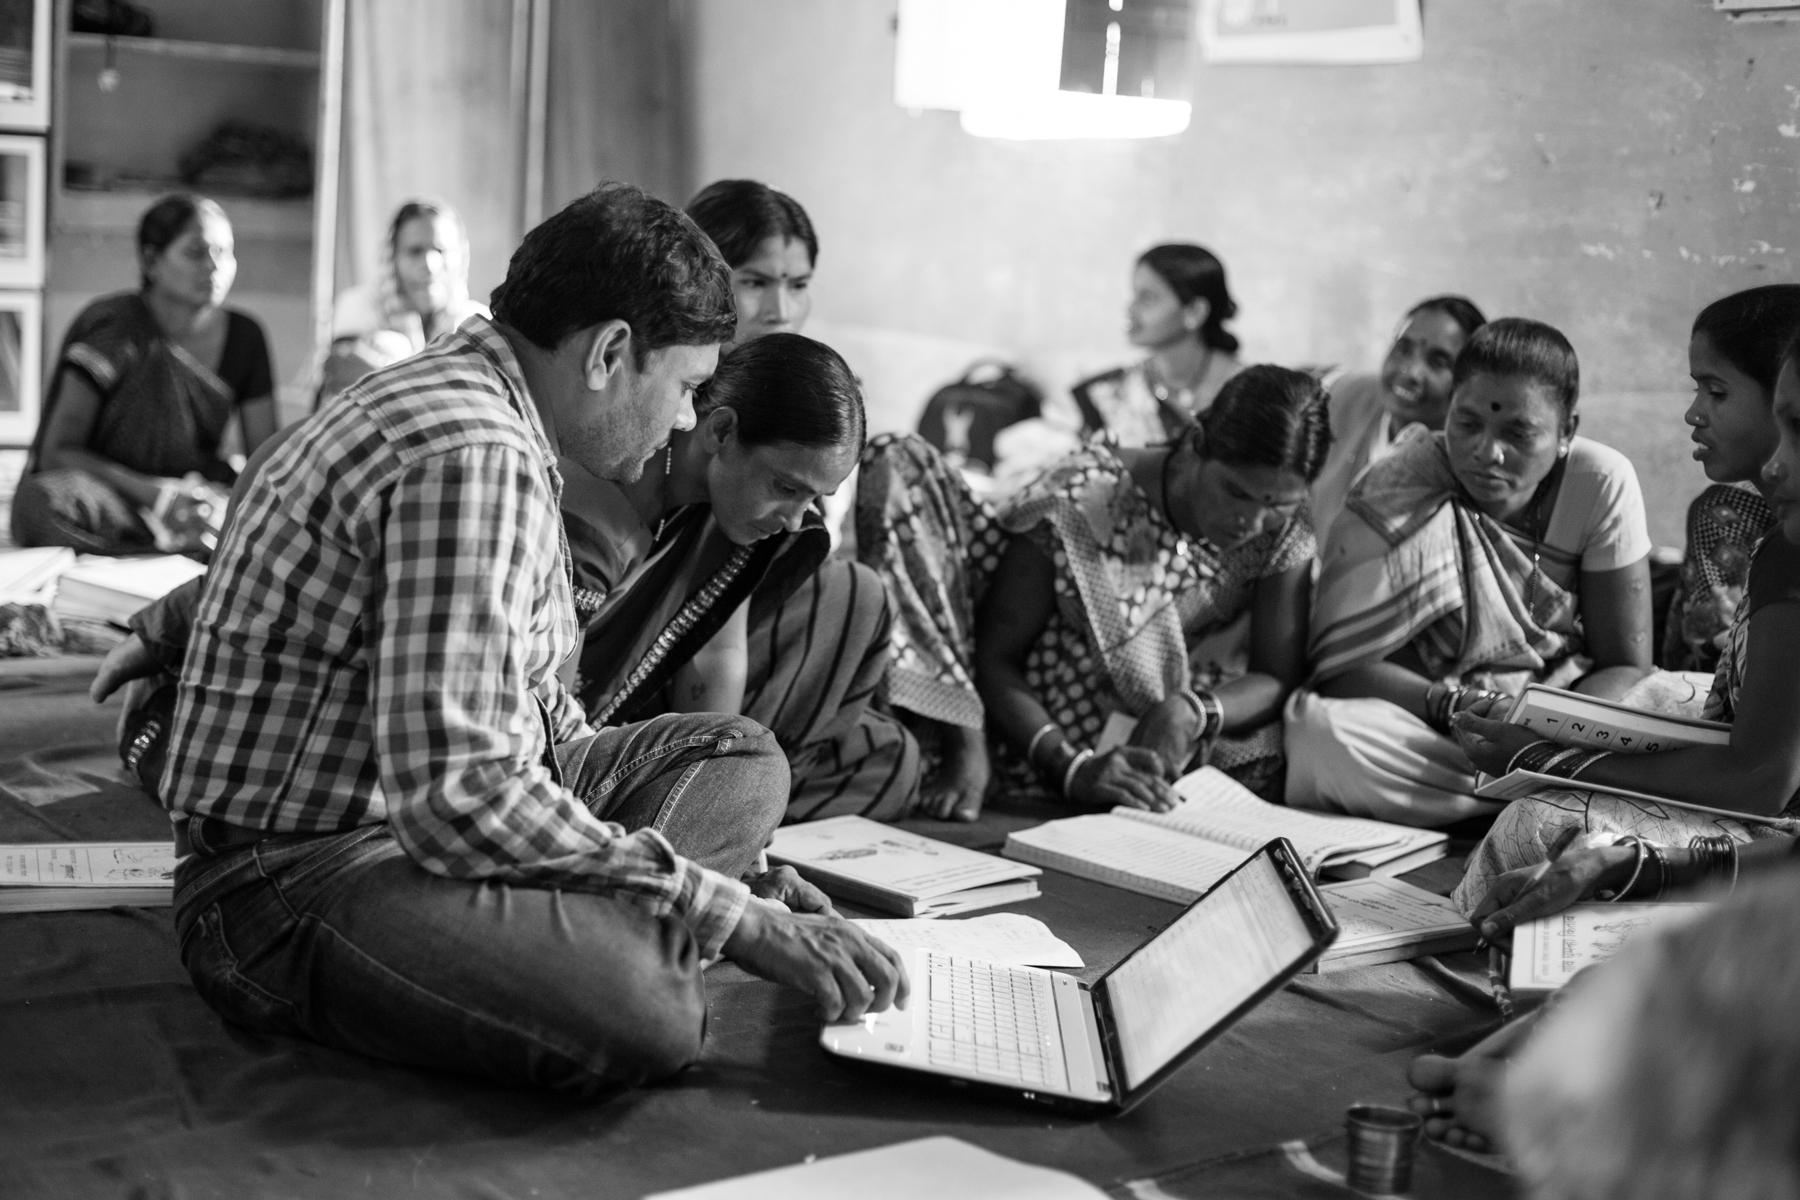 Prafull Chandel, senior field coordinator at Jan Swasthya Sahyog, discusses the data collected by village health workers during their monthly meeting. Regular supportive supervision is key to successful community programs.